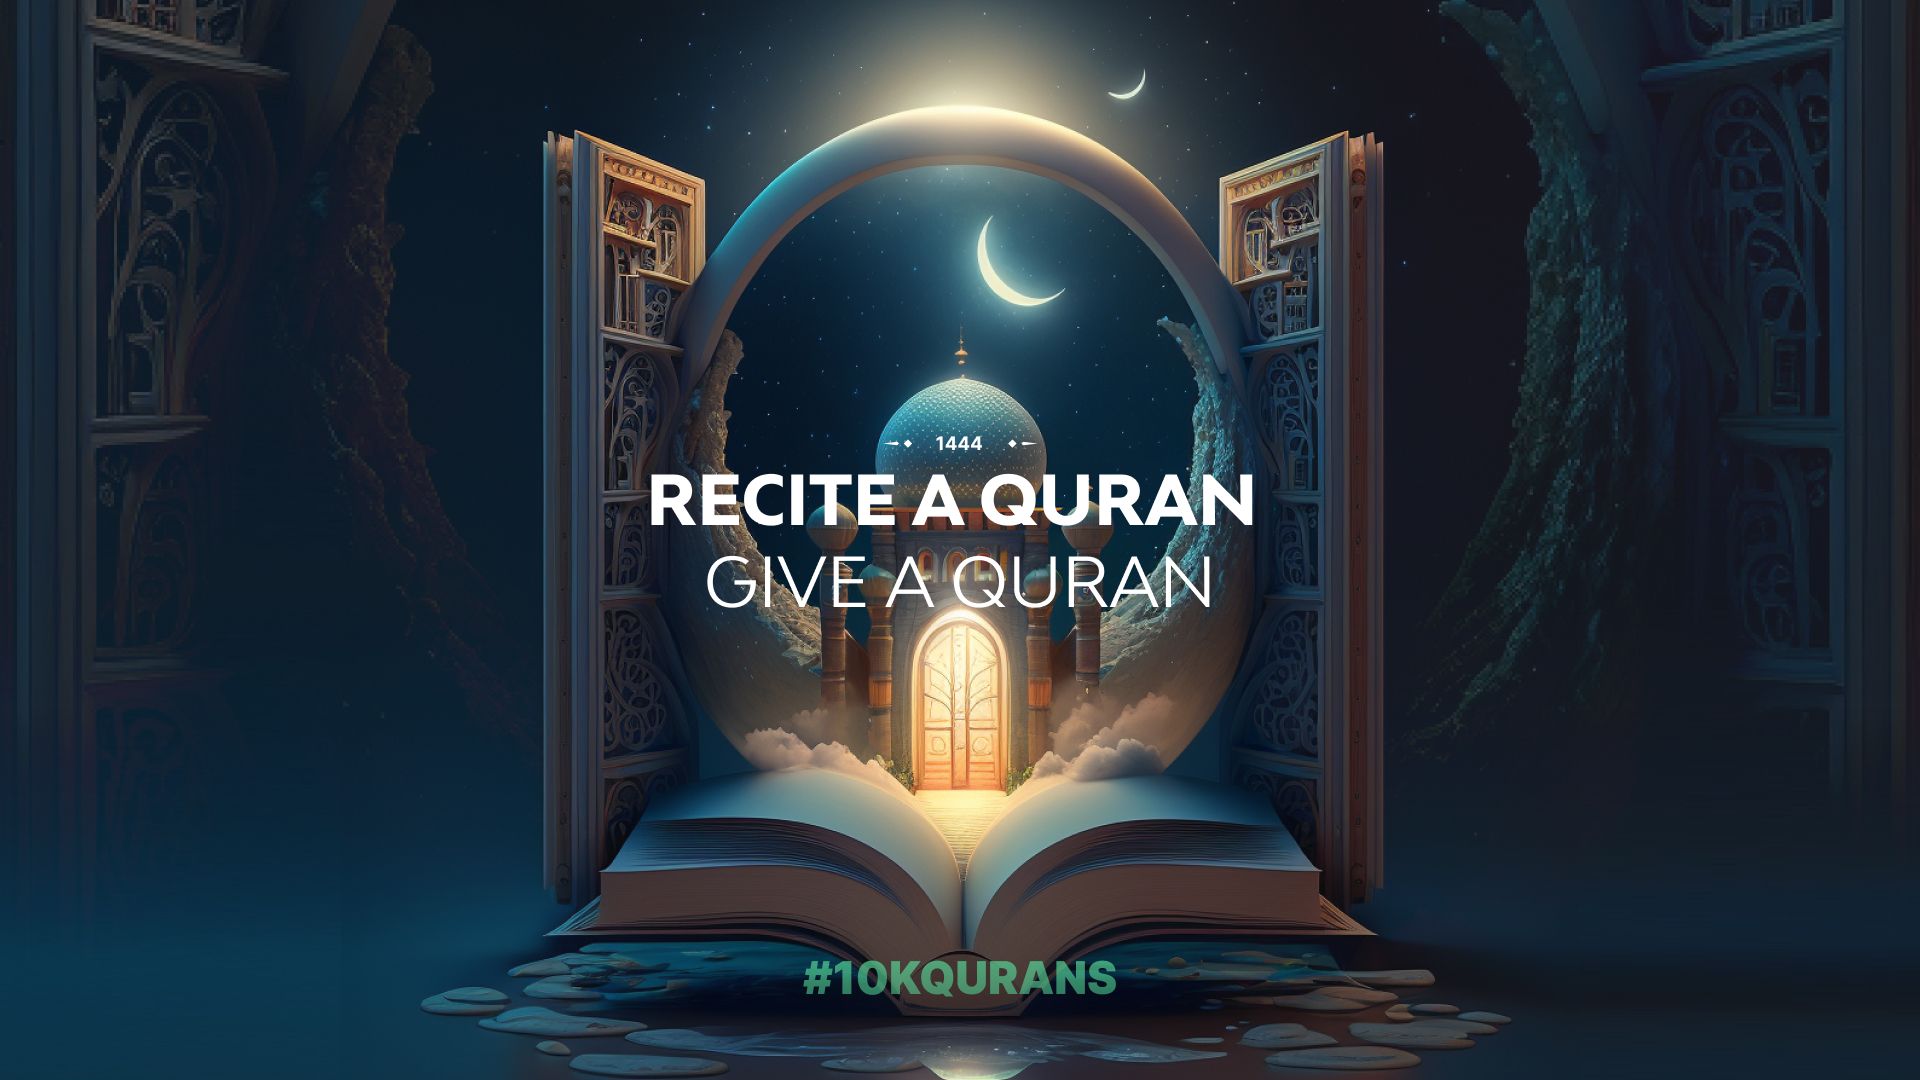 It's Back! How to Help Donate 10,000 Qurans THIS Ramadan